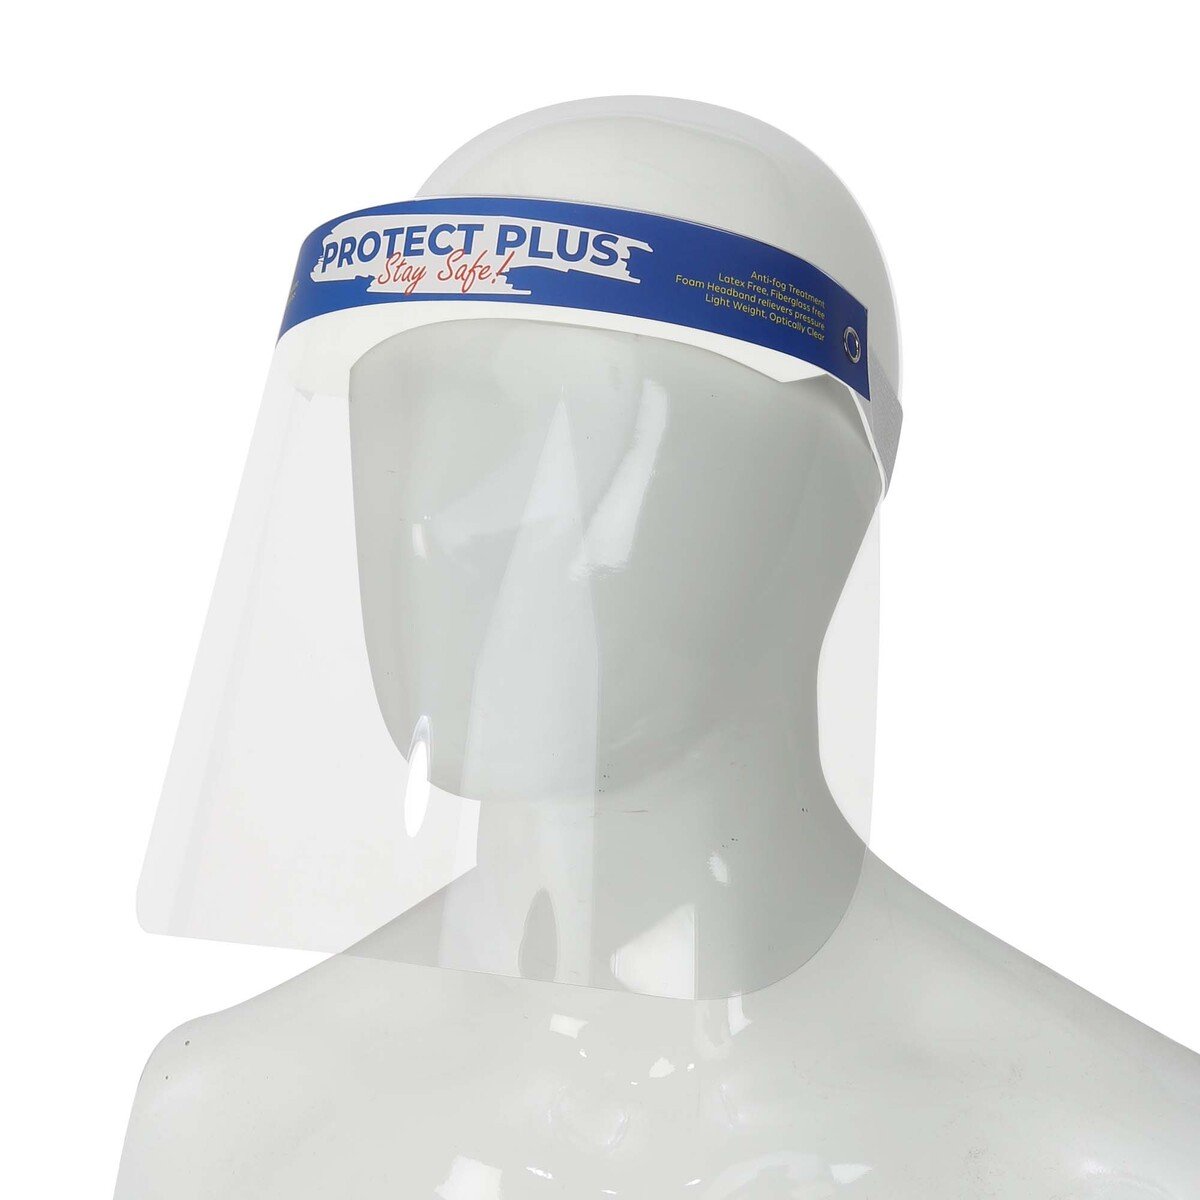 Protect Plus Personal Face Shield